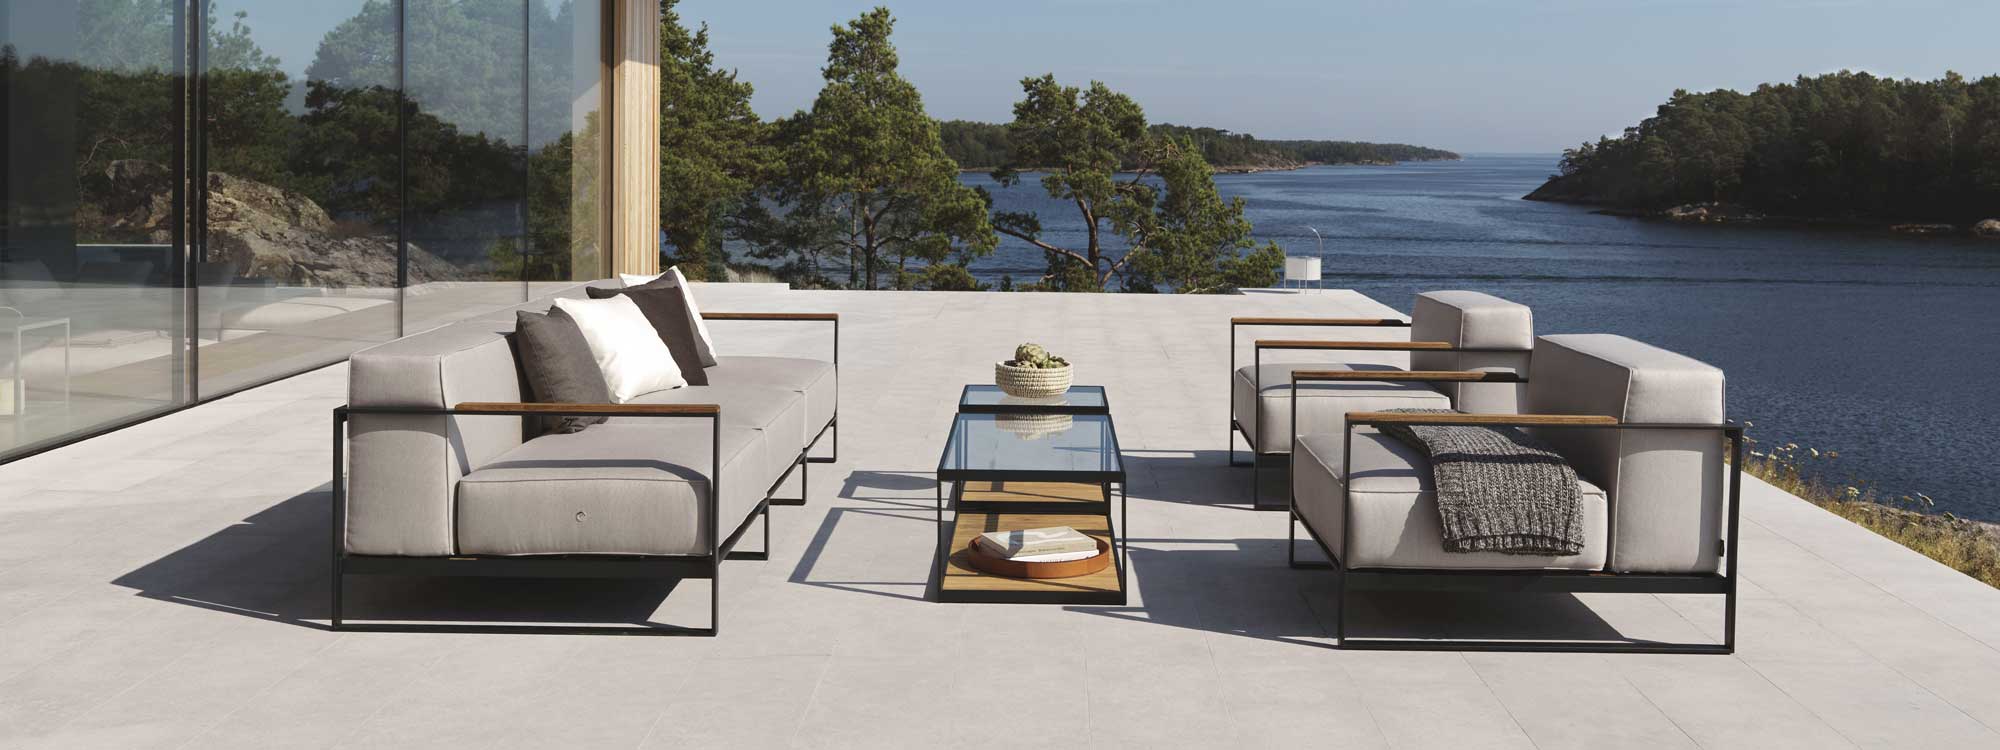 Image of Roshults Moore minimalist garden sofa and lounge chairs on terrace, with Swedish lake and woodland in the background